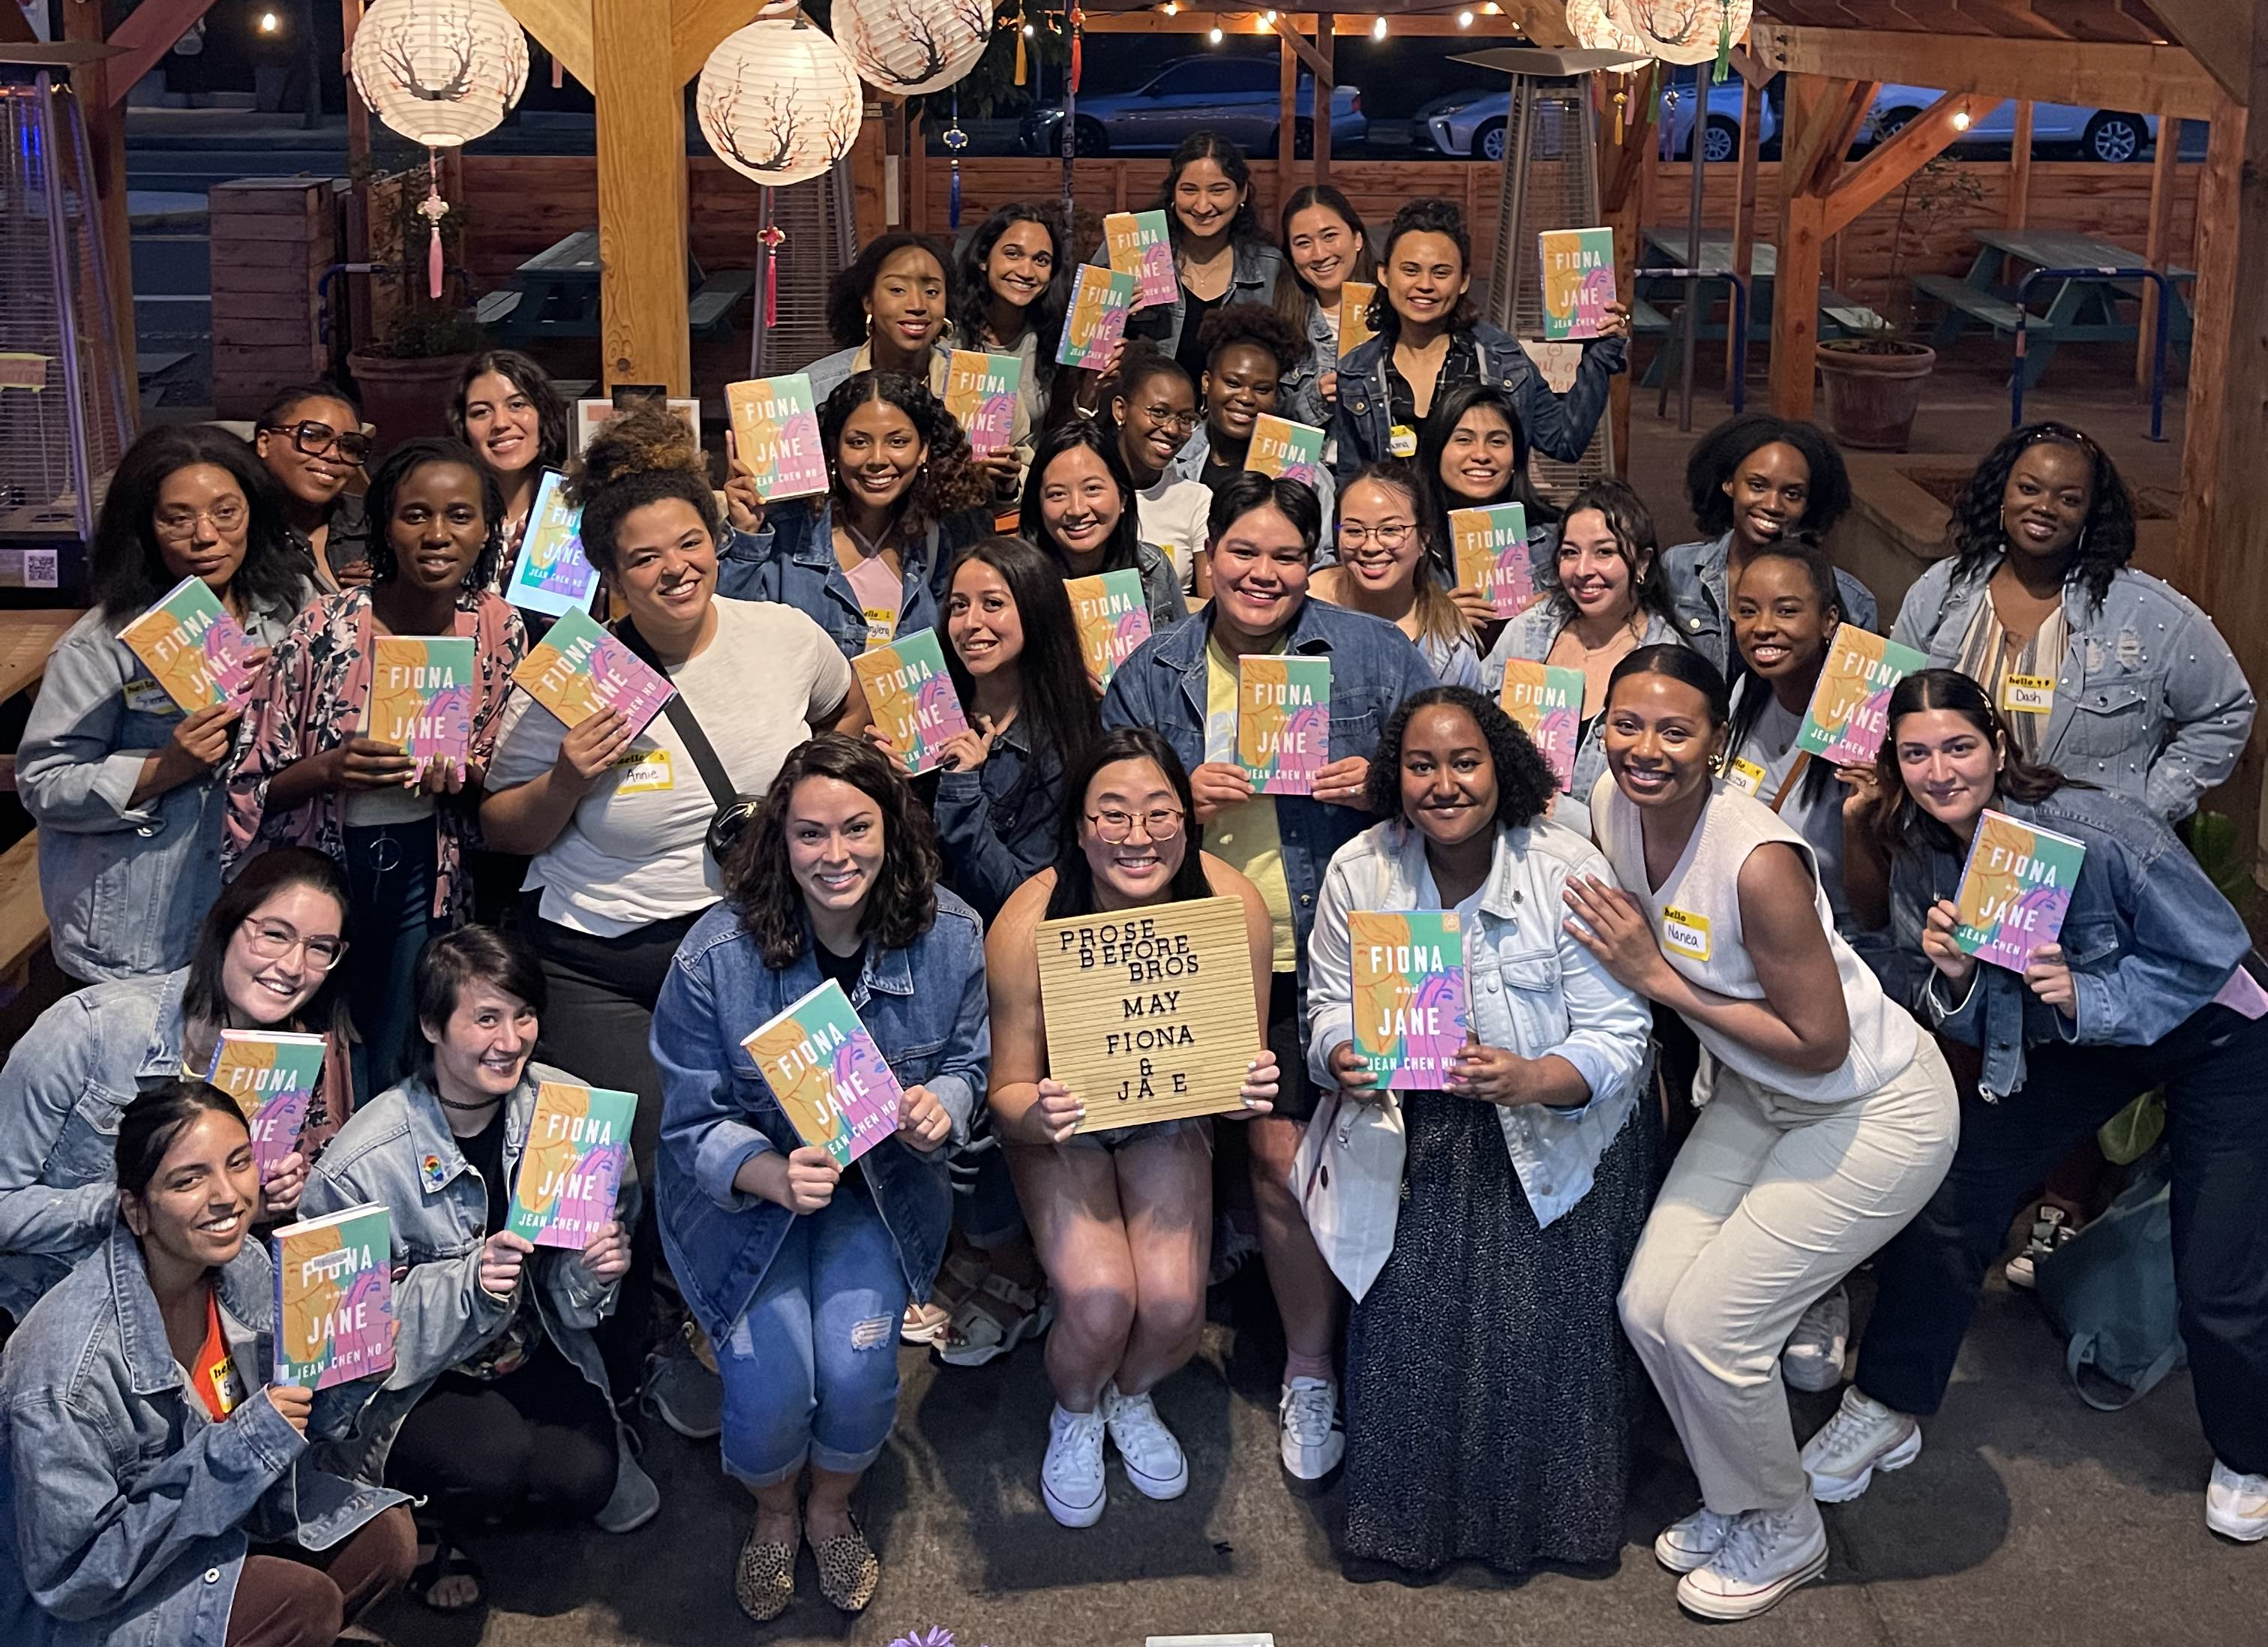 Attendees at a recent meeting of Prose Before Bros, a book club for women of color based in Portland, OR.